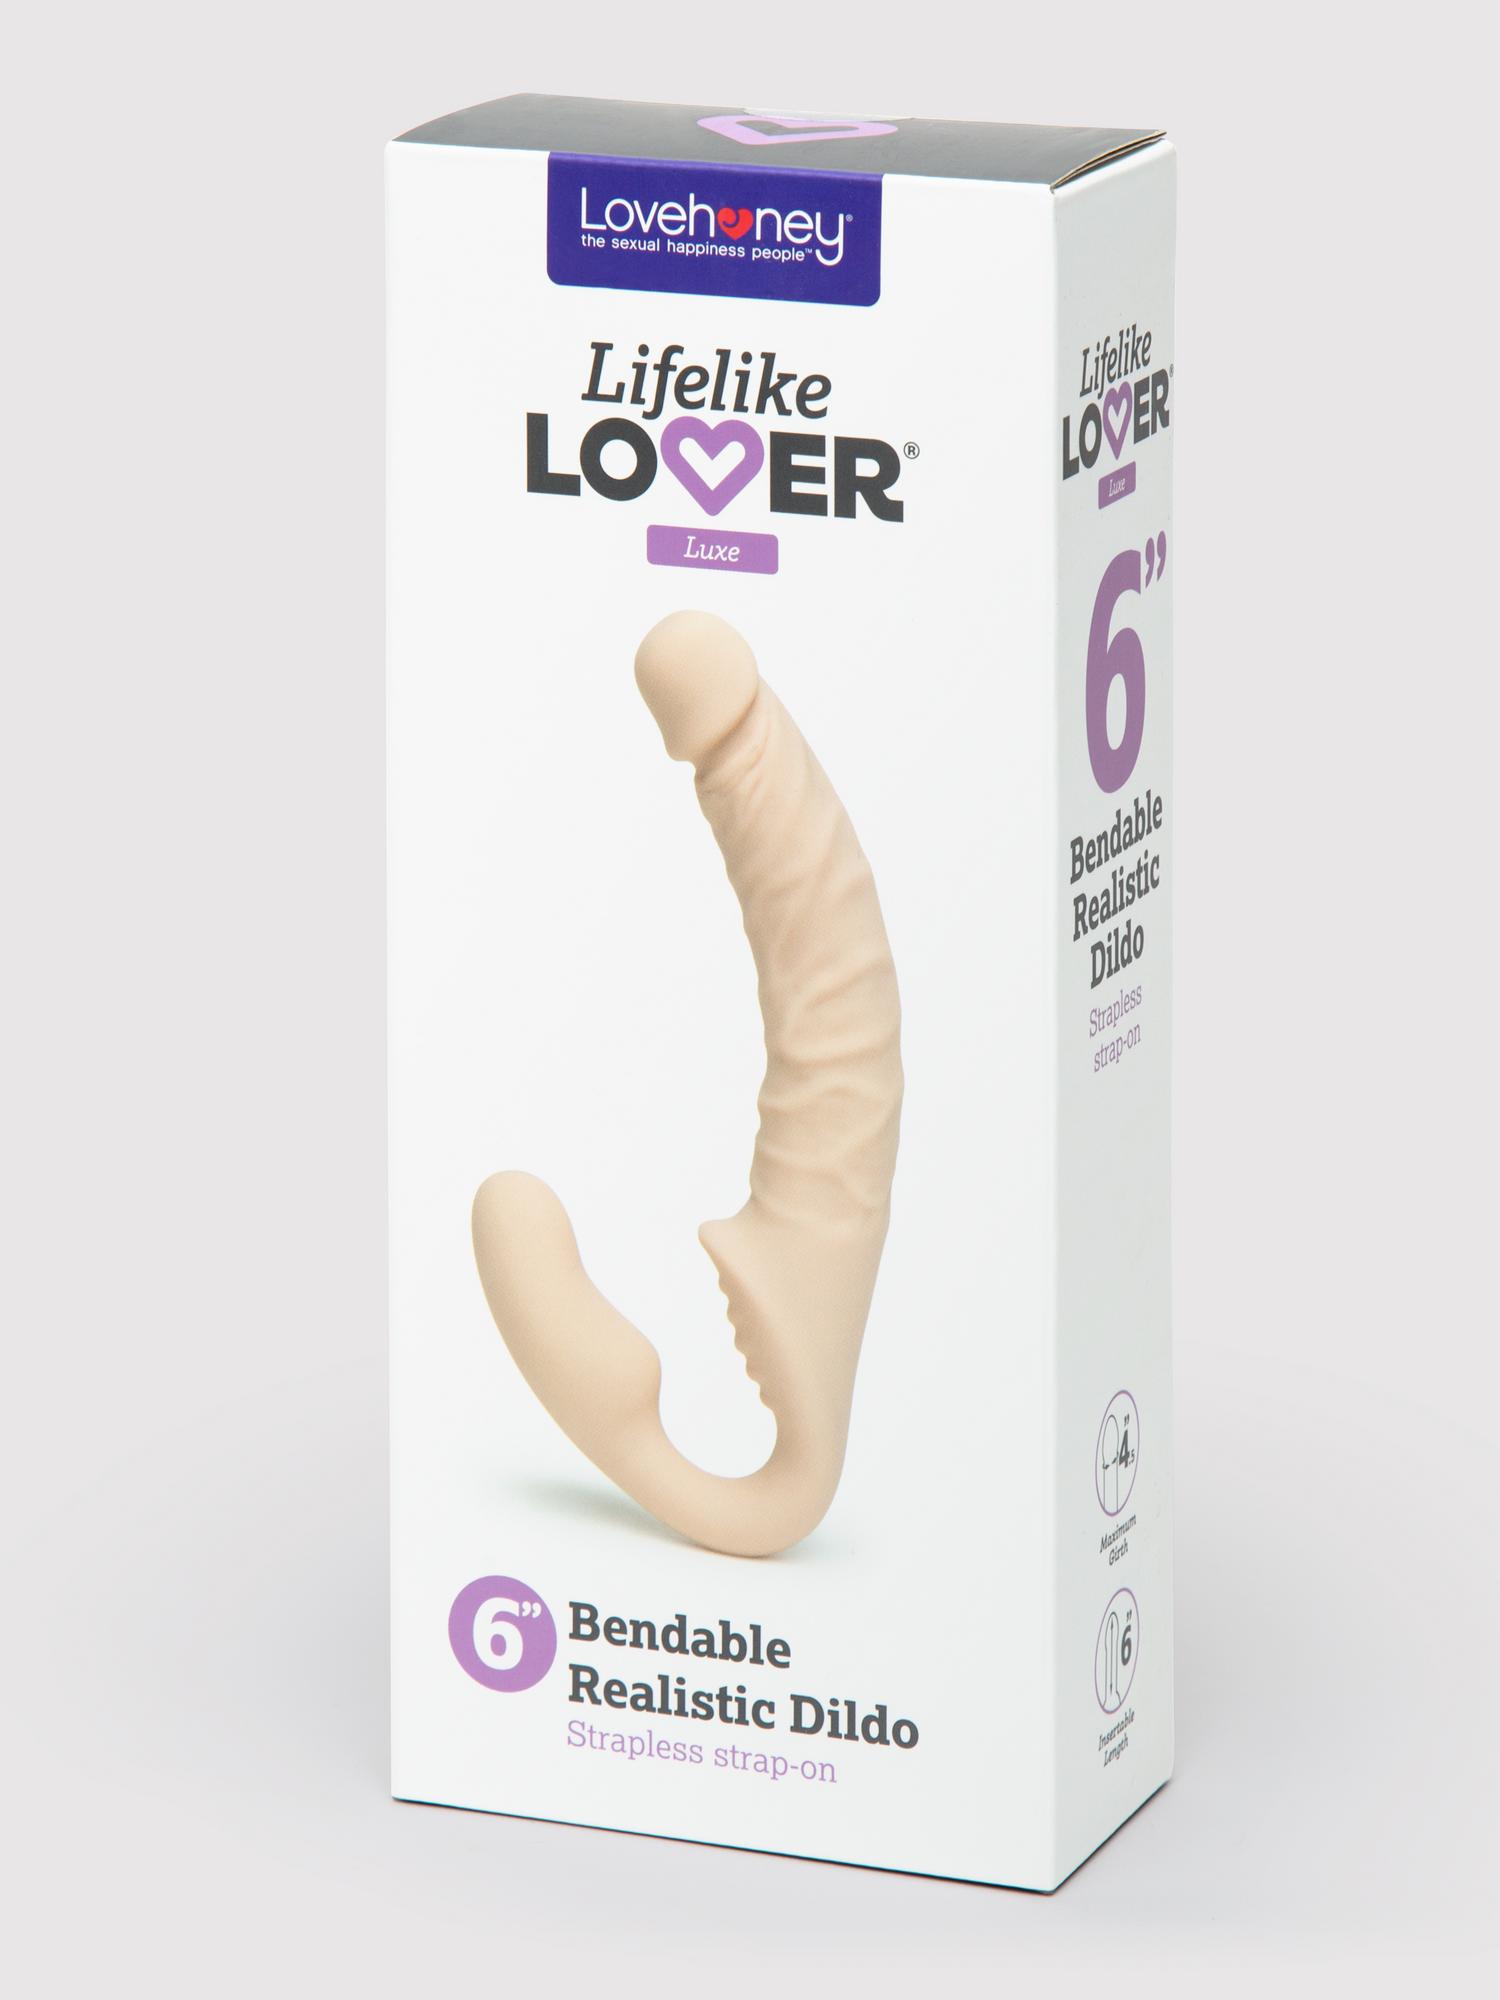 Lifelike Lover Luxe Posable Realistic Silicone Strapless Strap-On. Slide 6